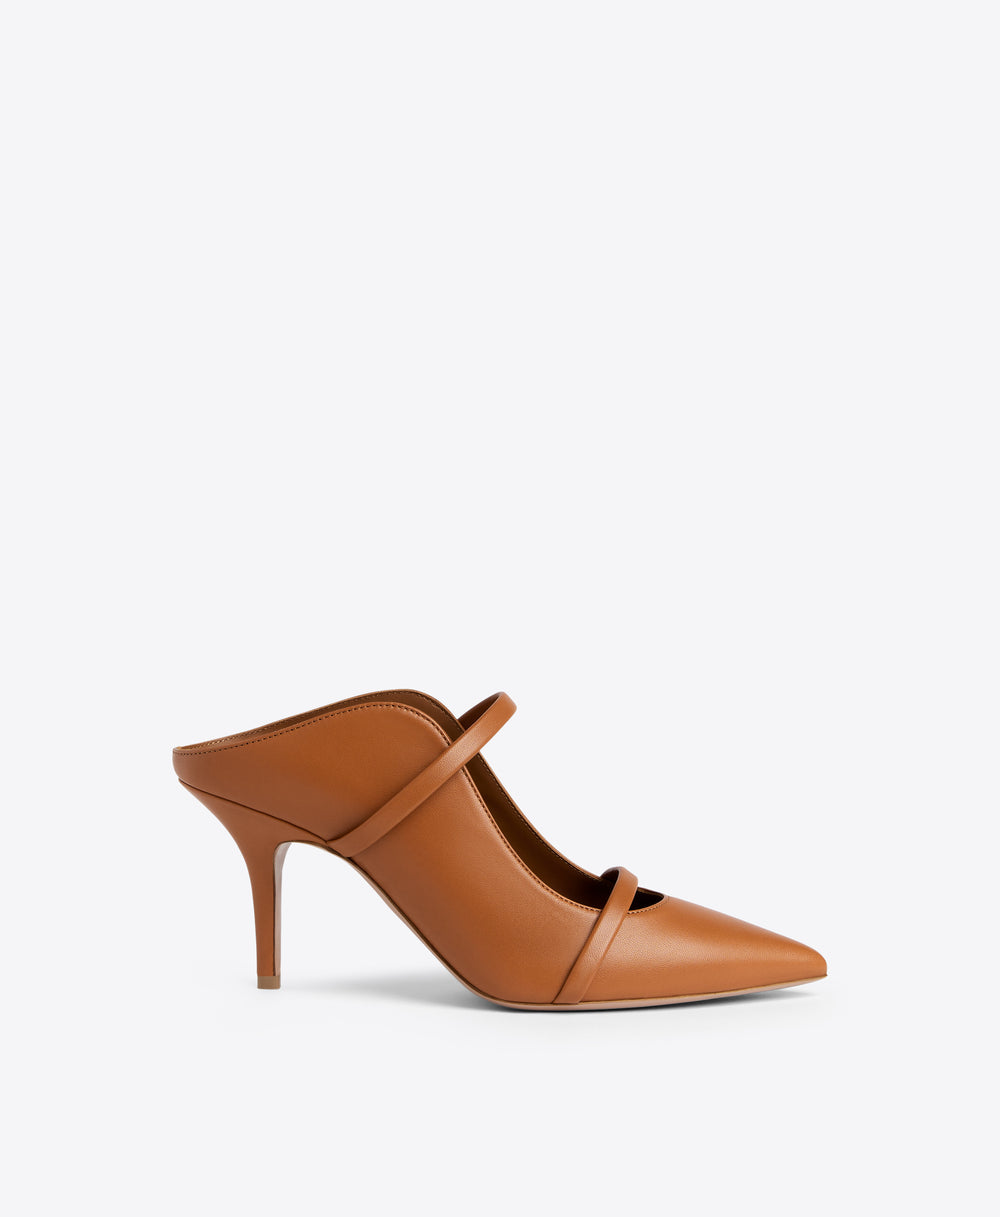 Malone Souliers Maureen 70mm Brown Leather Heeled Mules